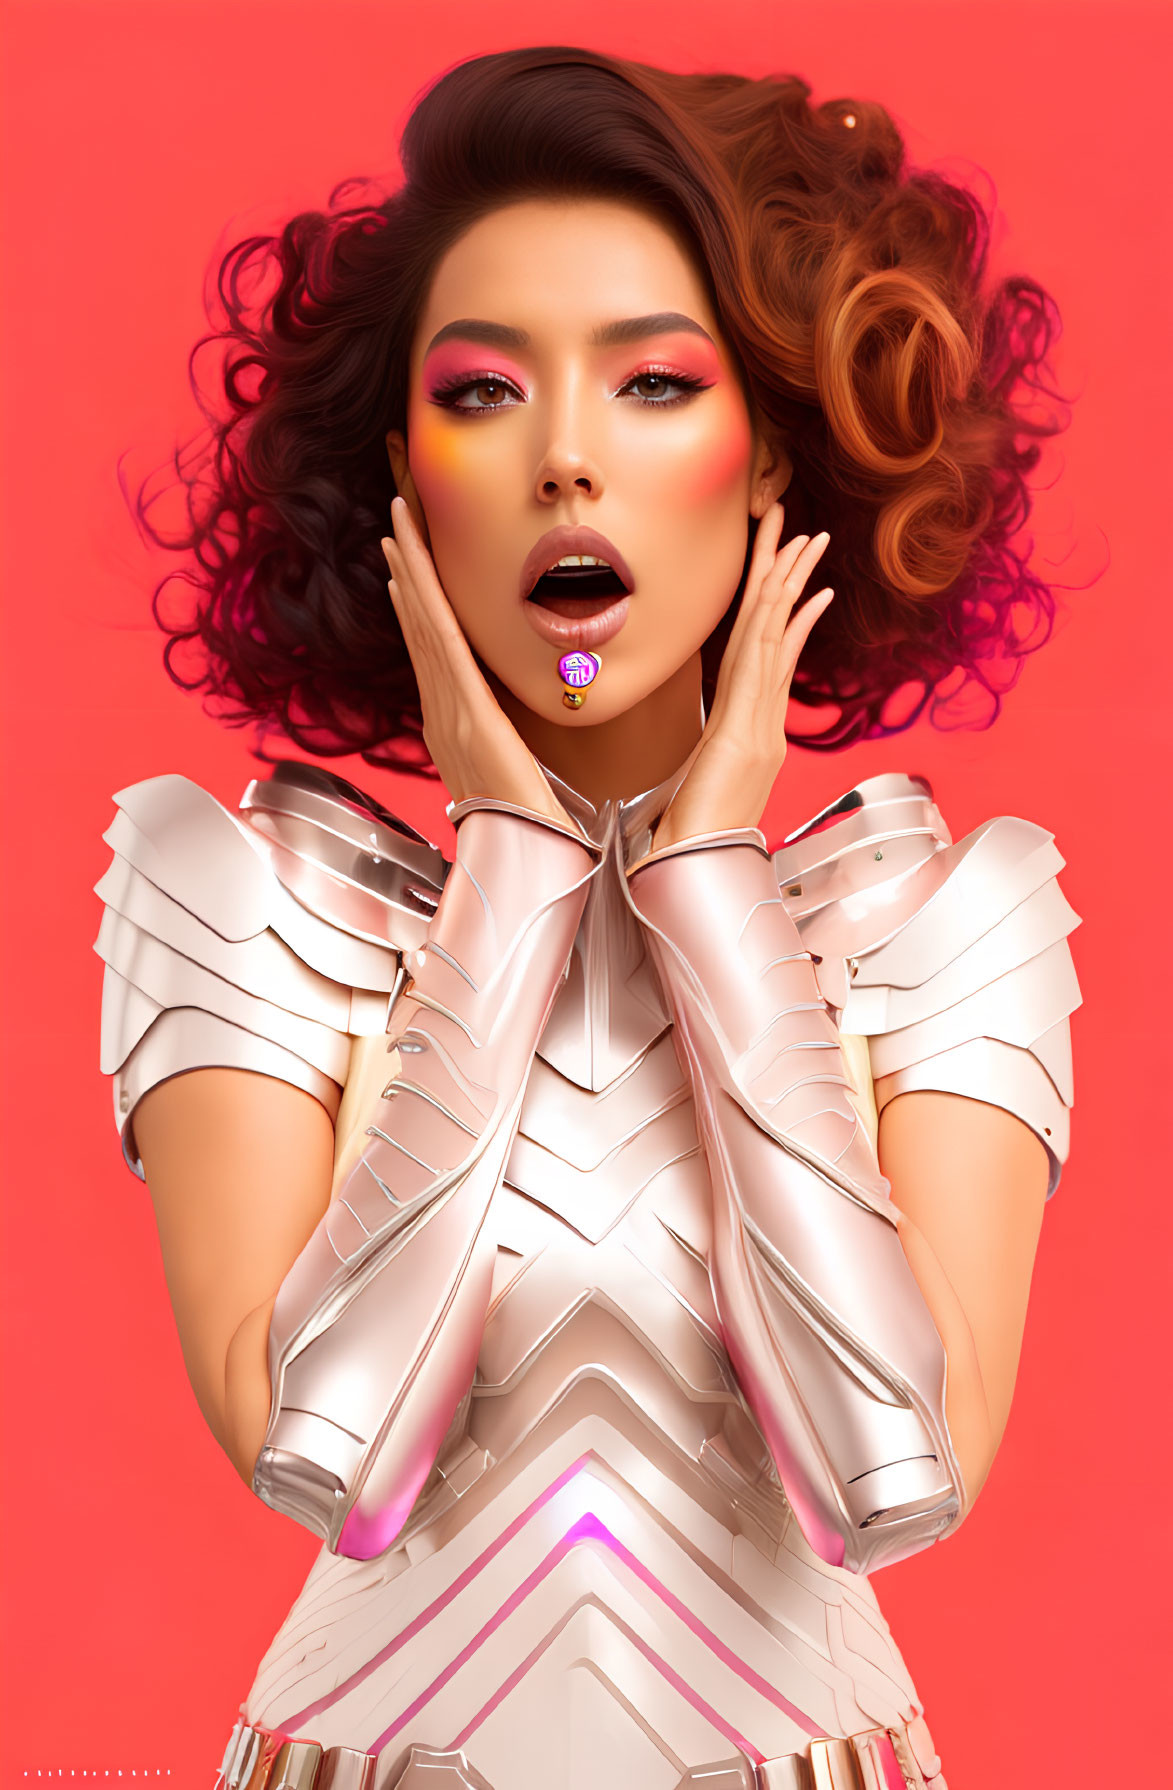 Portrait of a person with curled hair and dramatic makeup in futuristic white armor on pink background